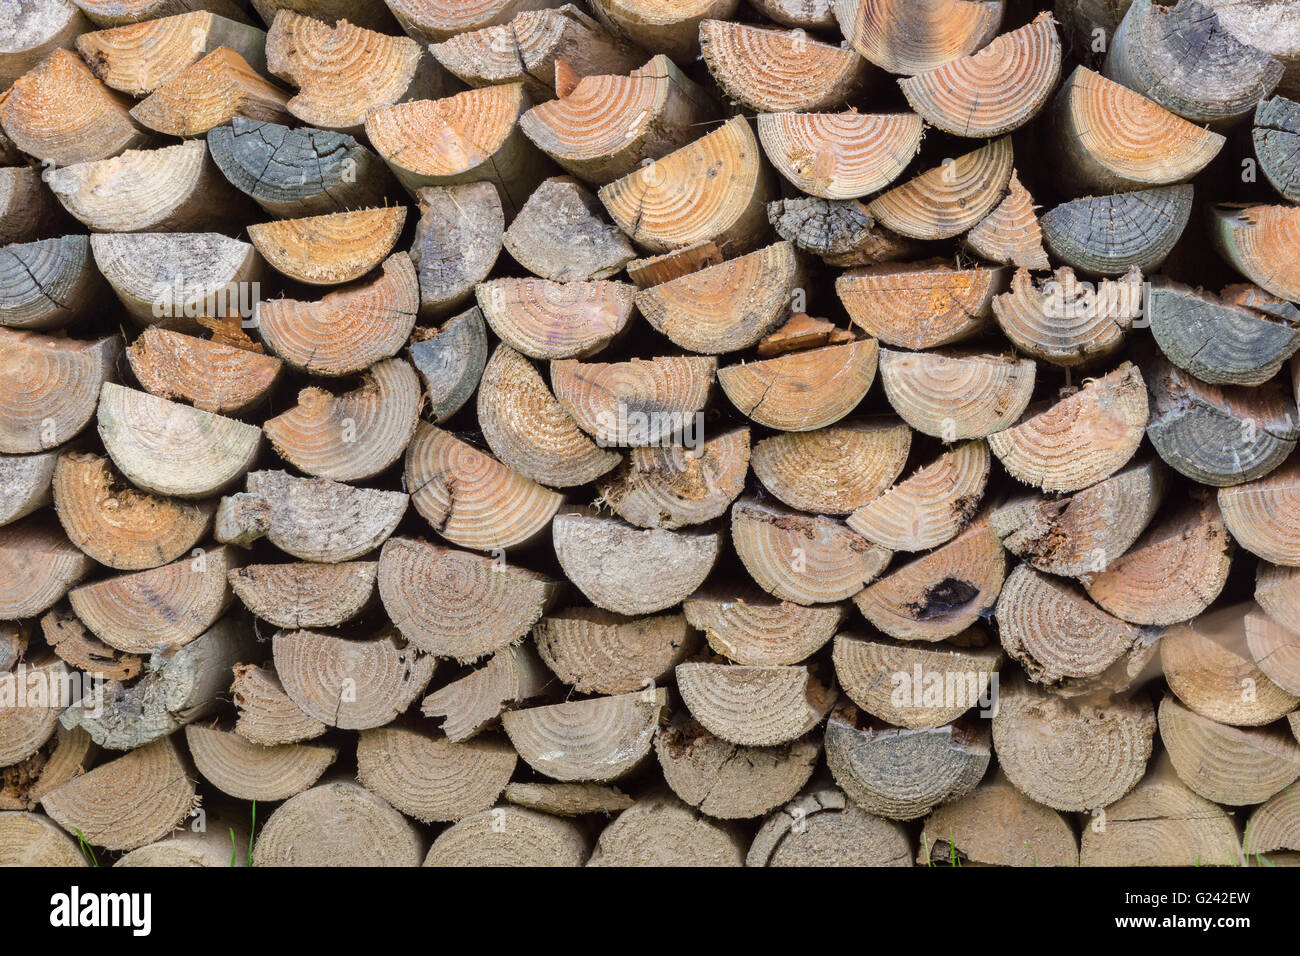 A pile of stacked firewood. Stock Photo